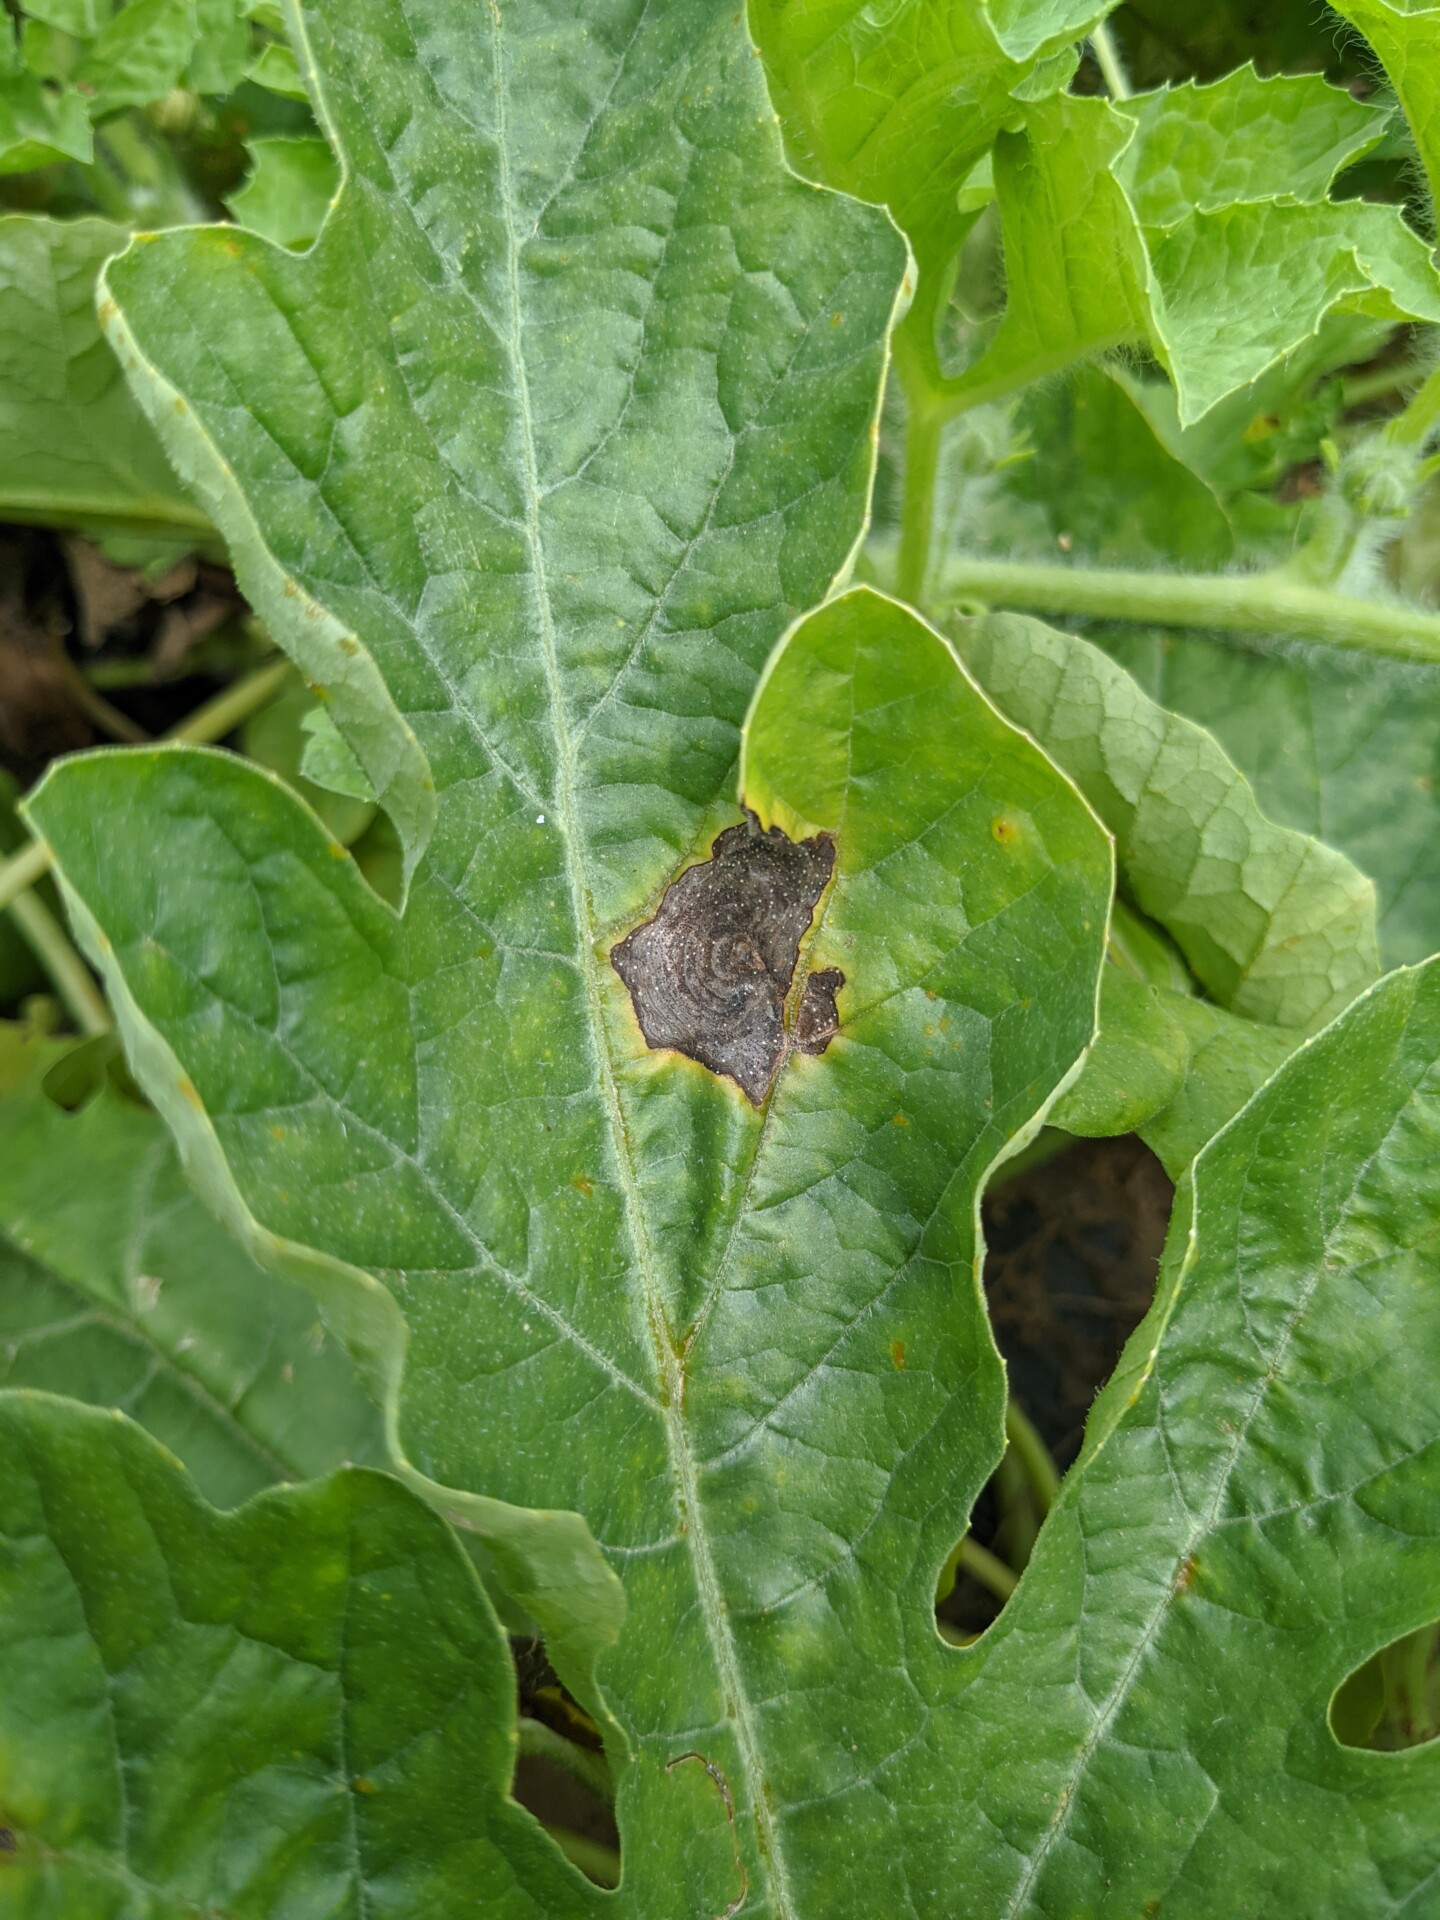 Figure 2. Gummy stem blight lesions on watermelon leaves sometimes have a ring-like structure.